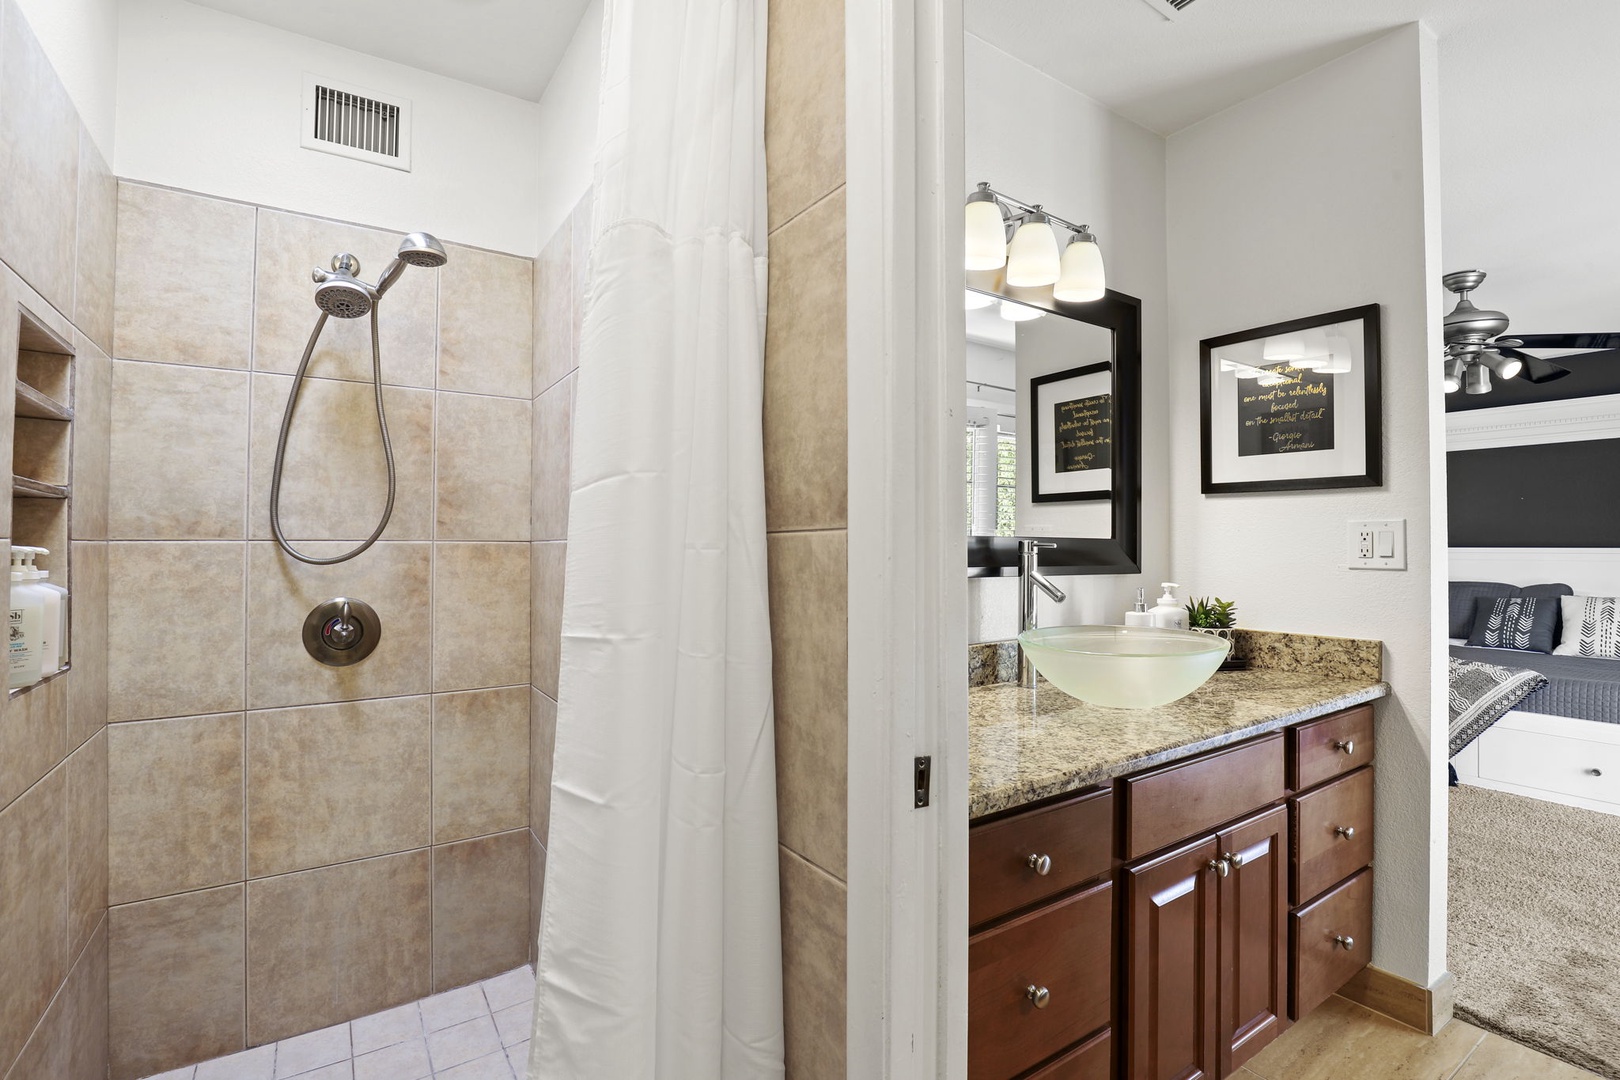 Spacious Master Bath Shower with complimentary body wash, shampoo, conditioner.